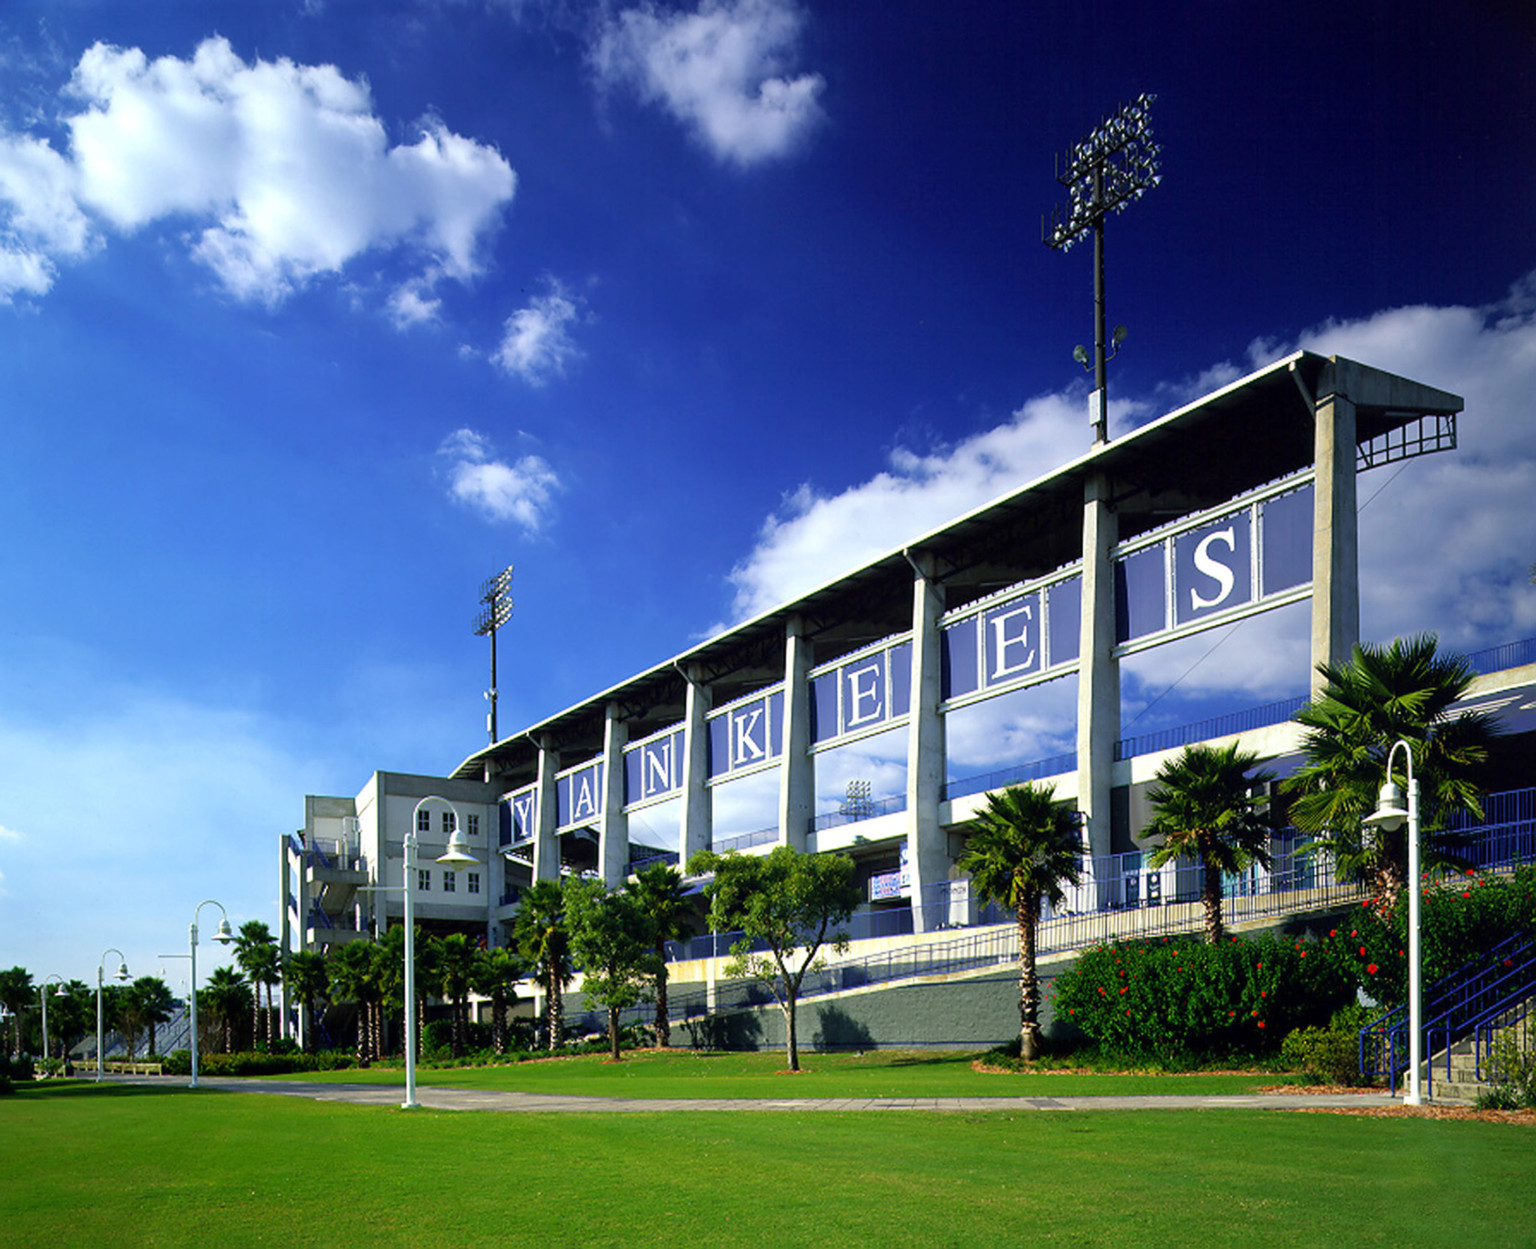 Exterior of Legends Field in Tampa, Florida. Lettering on blue panels of overhang spells Yankees, below a ramp leads to lawn